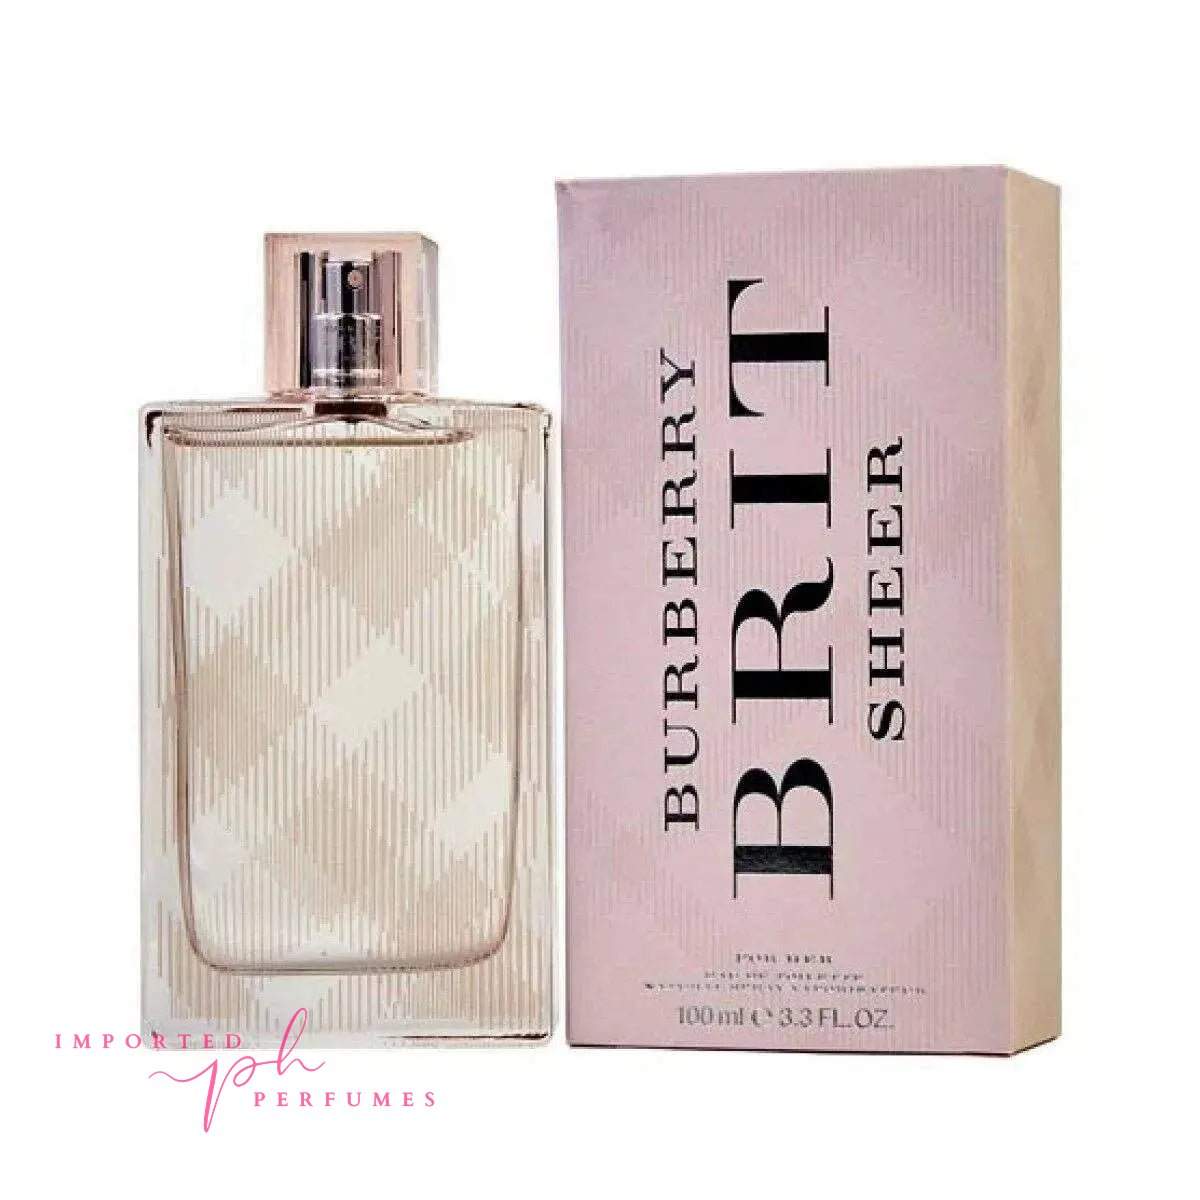 [TESTER] BURBERRY Brit Sheer Eau de Toilette For Her 100ml-Imported Perfumes Co-100ml,200ml,brit,burberry,test,TESTER,women